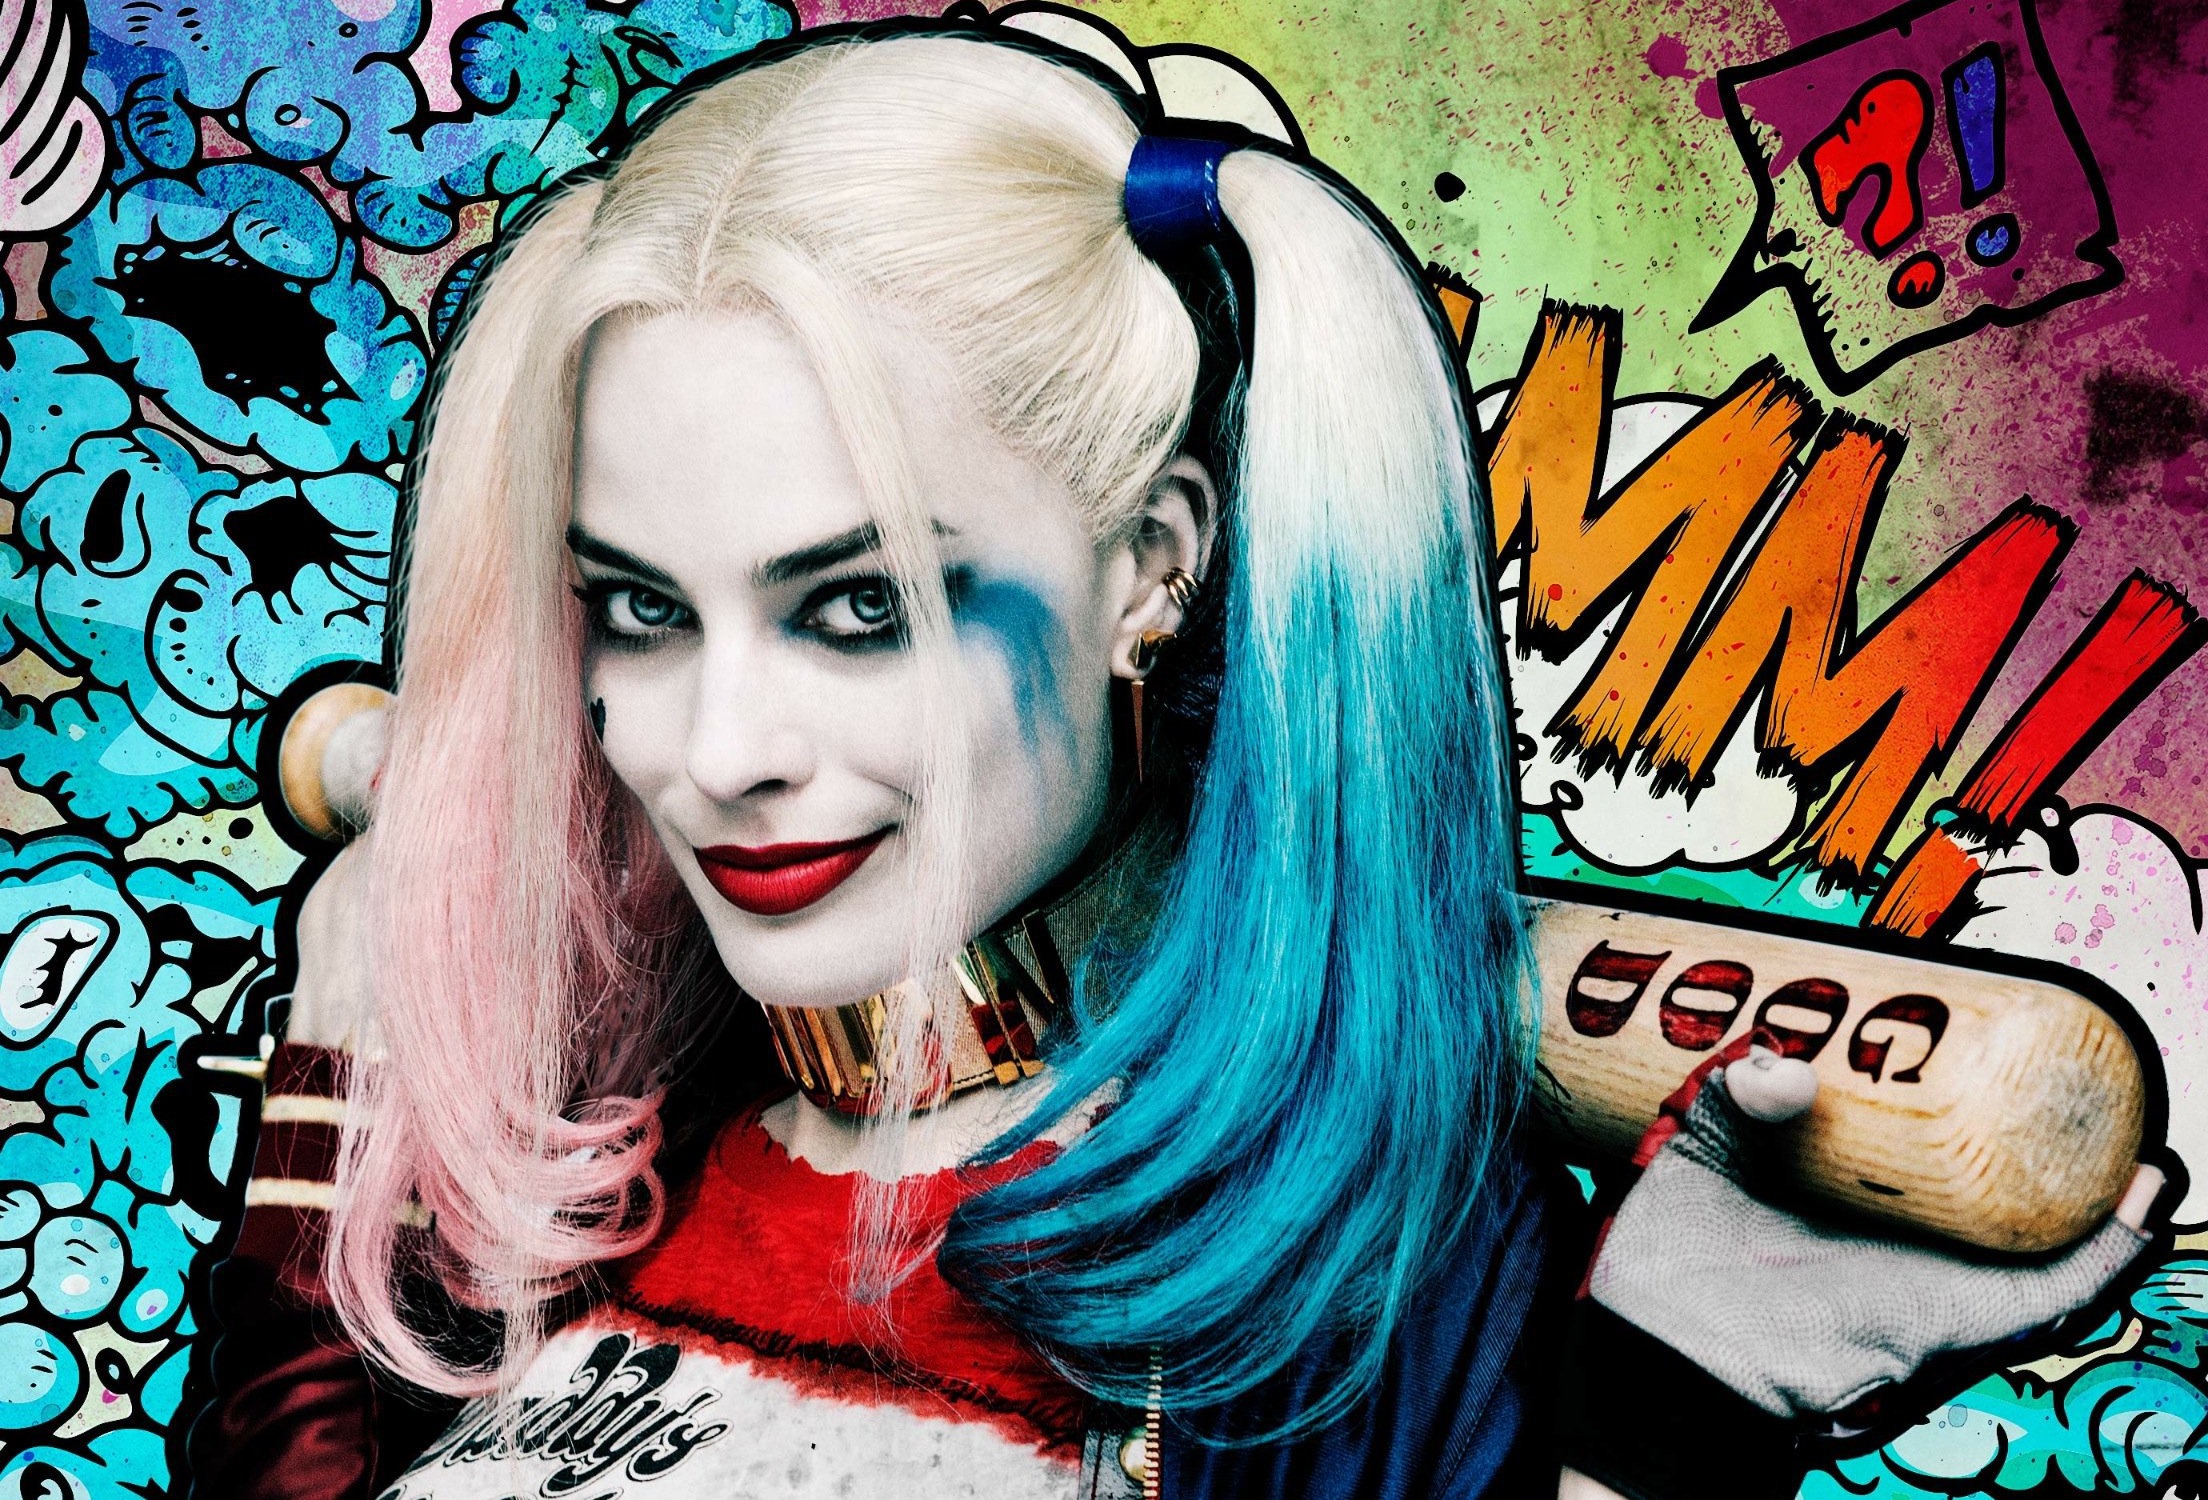 harley quinn, blue eyes, suicide squad, movie, baseball bat, blonde, dc comics, margot robbie, smile, two toned hair High Definition image